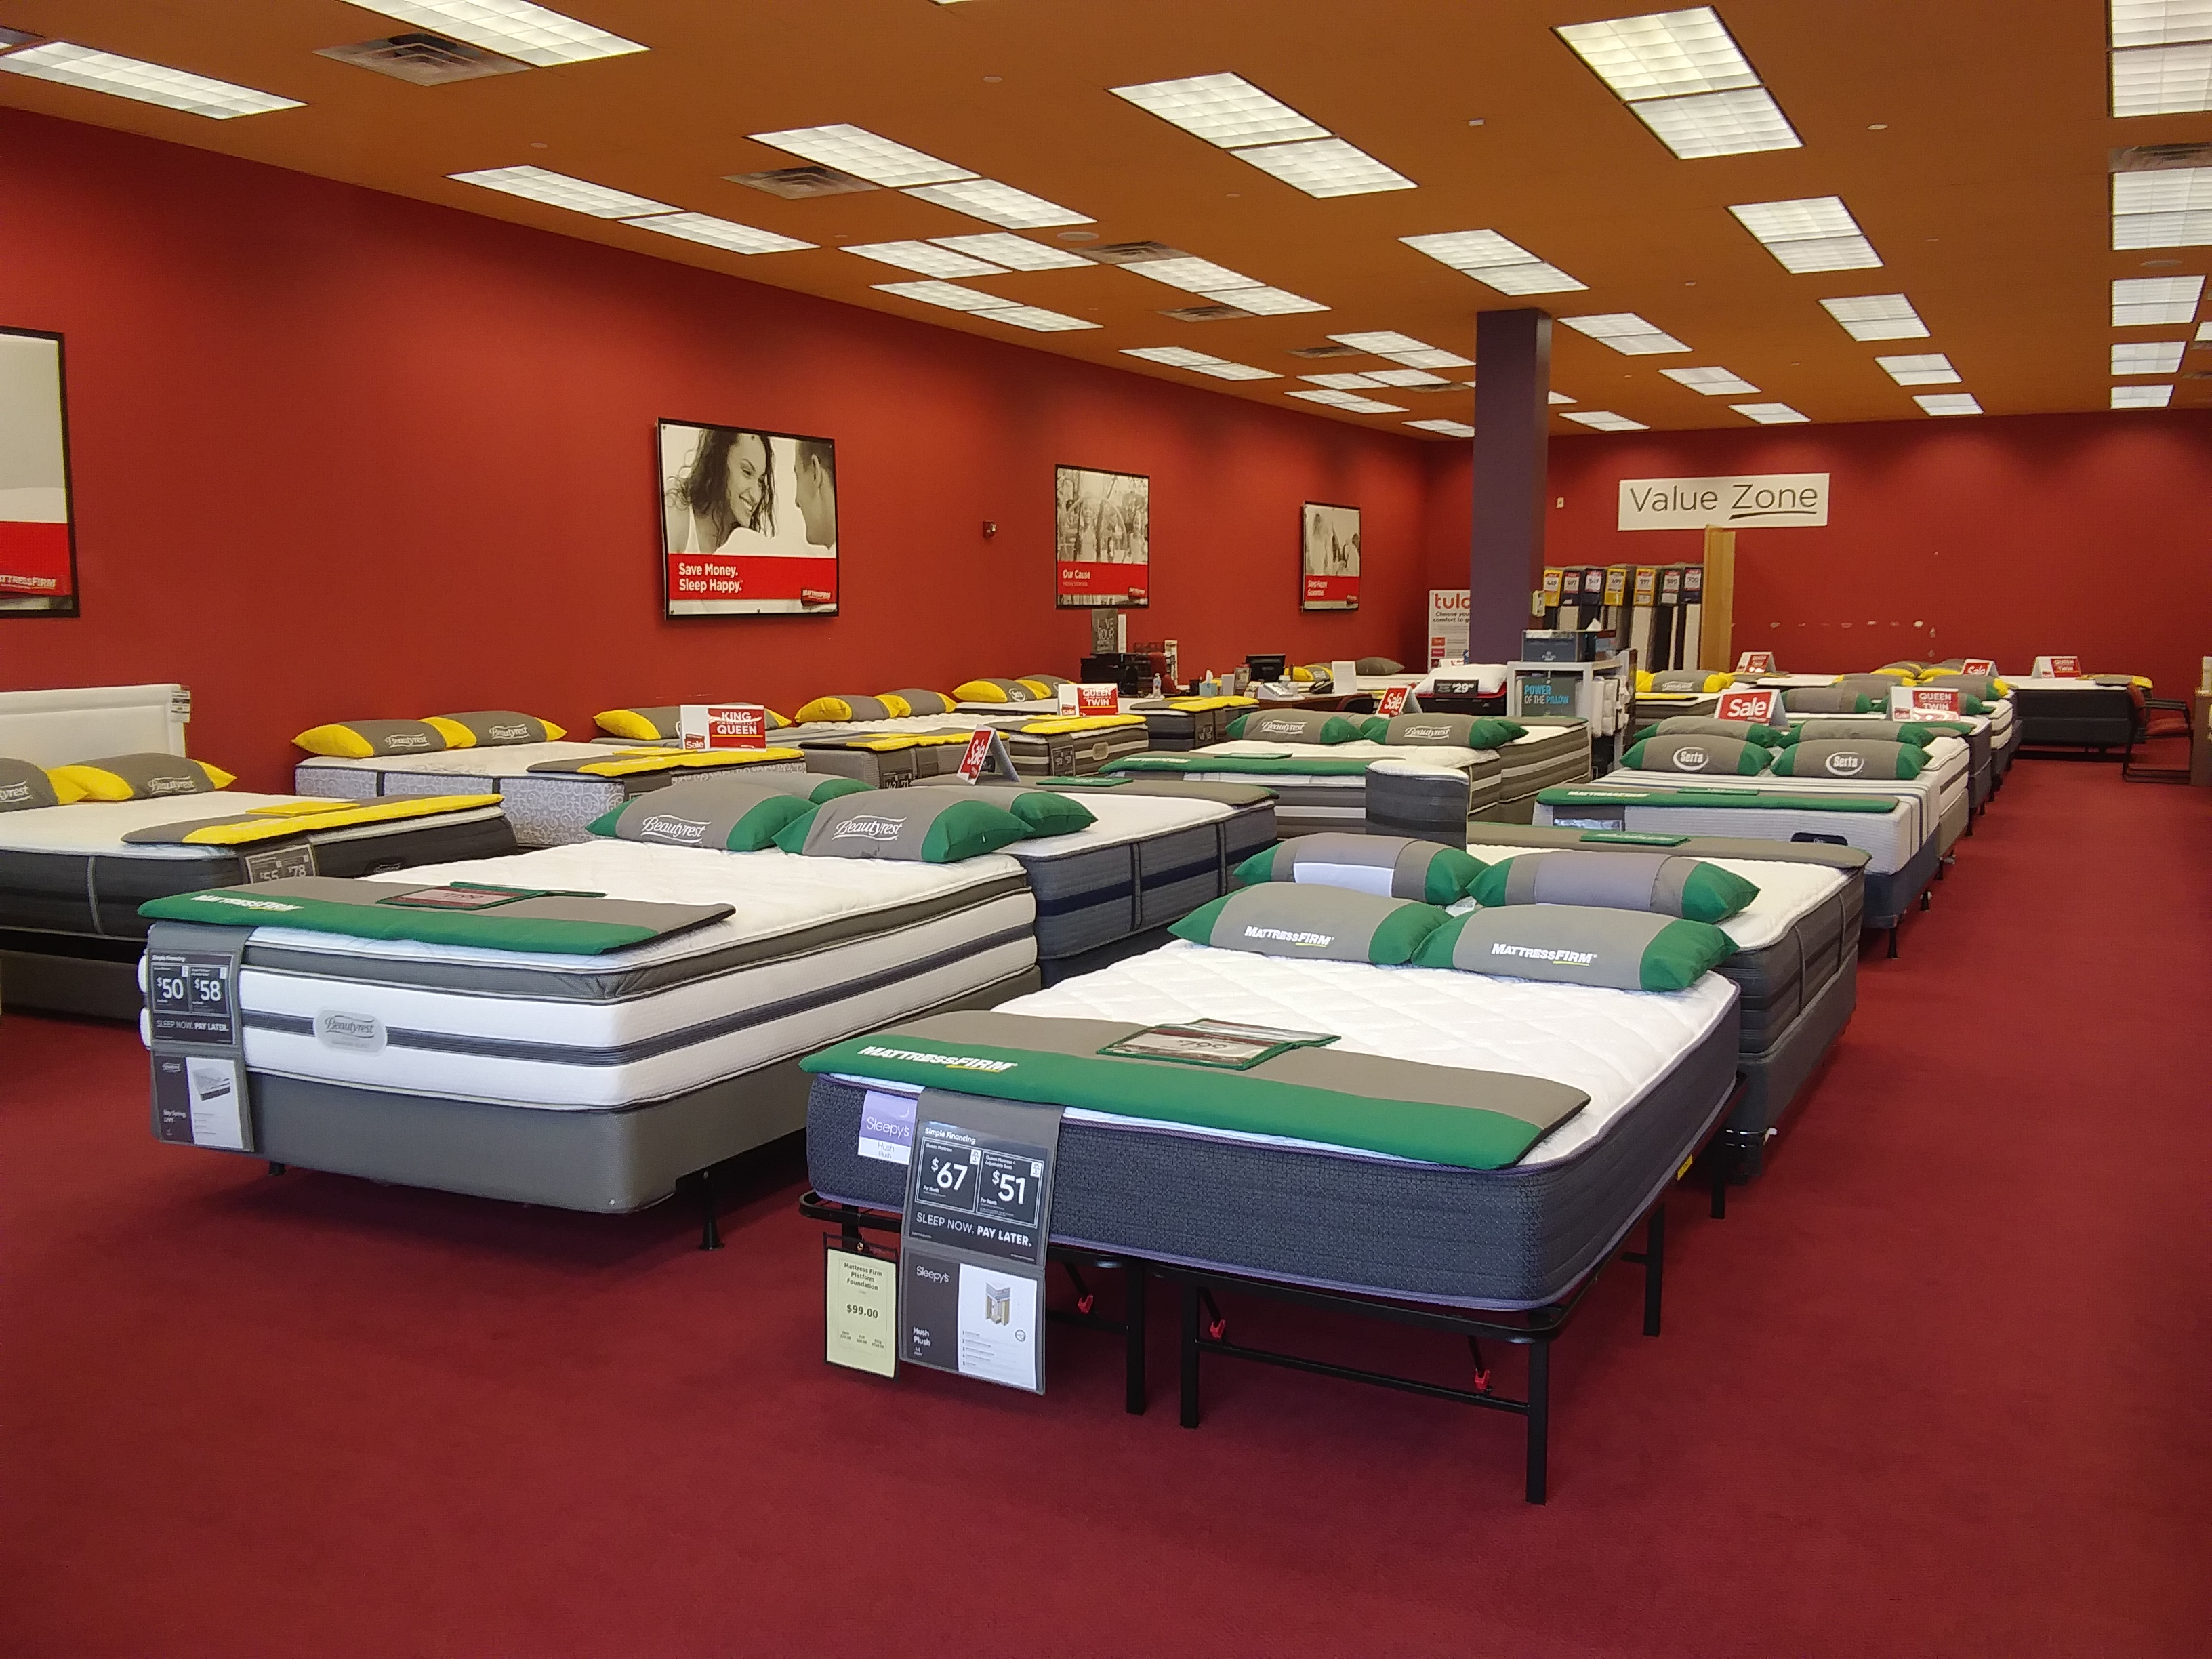 Mattress Firm East Rutherford Photo